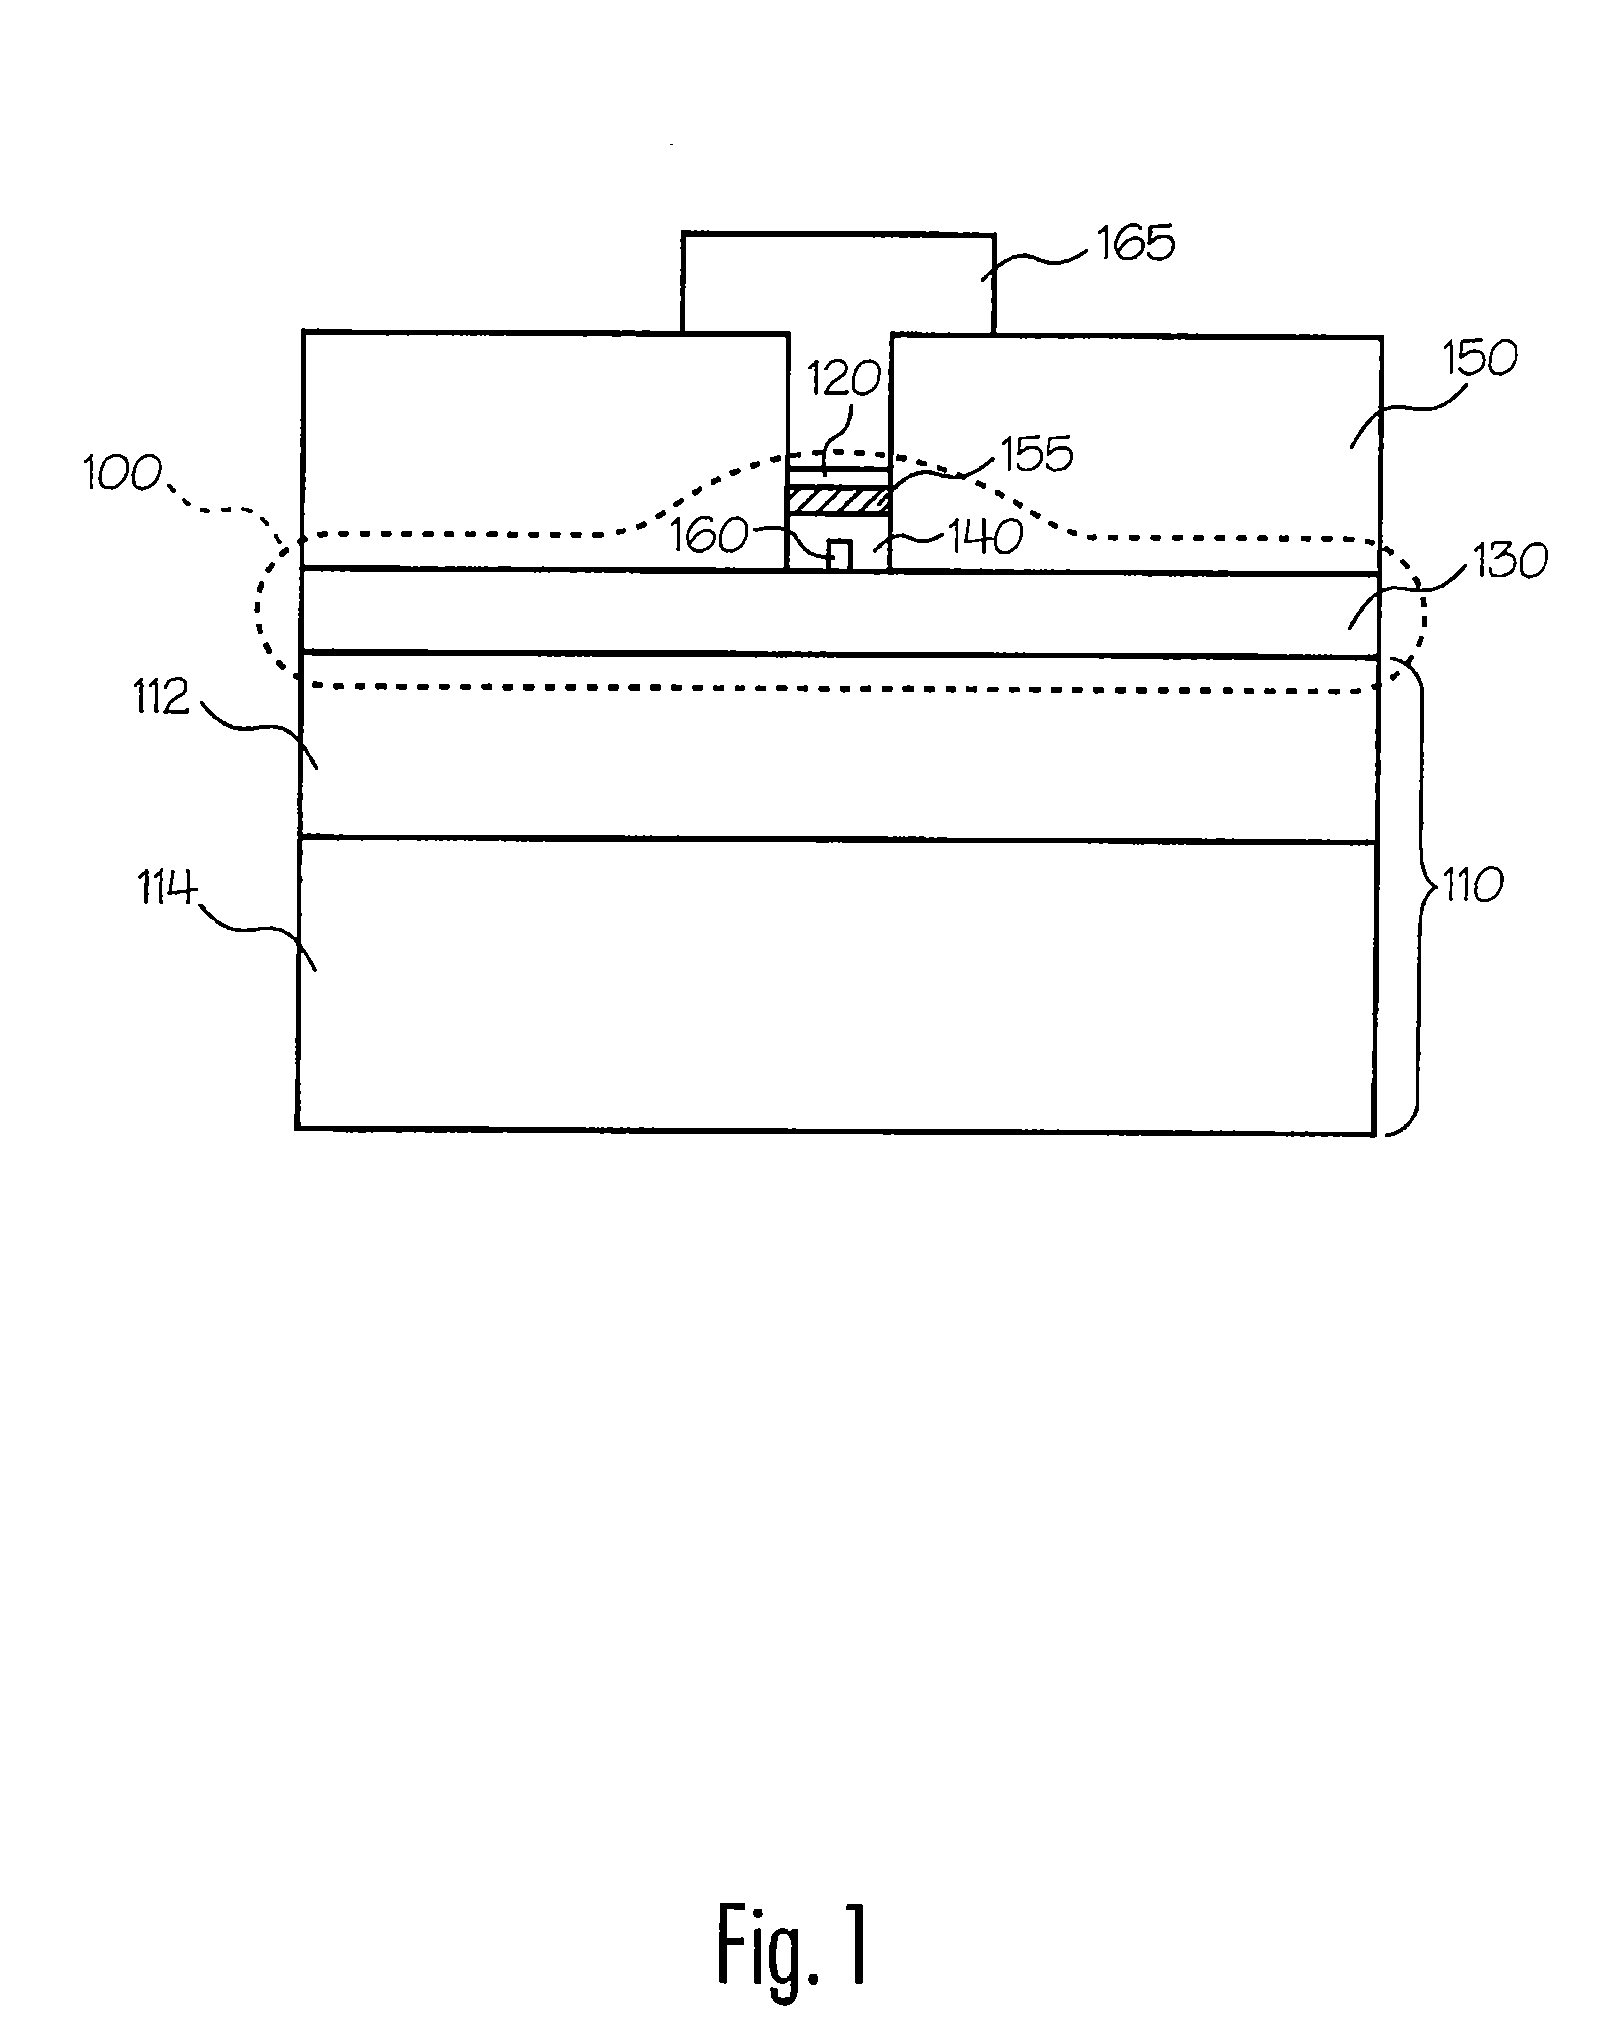 Programmable metallization cell structures including an oxide electrolyte, devices including the structure and method of forming same